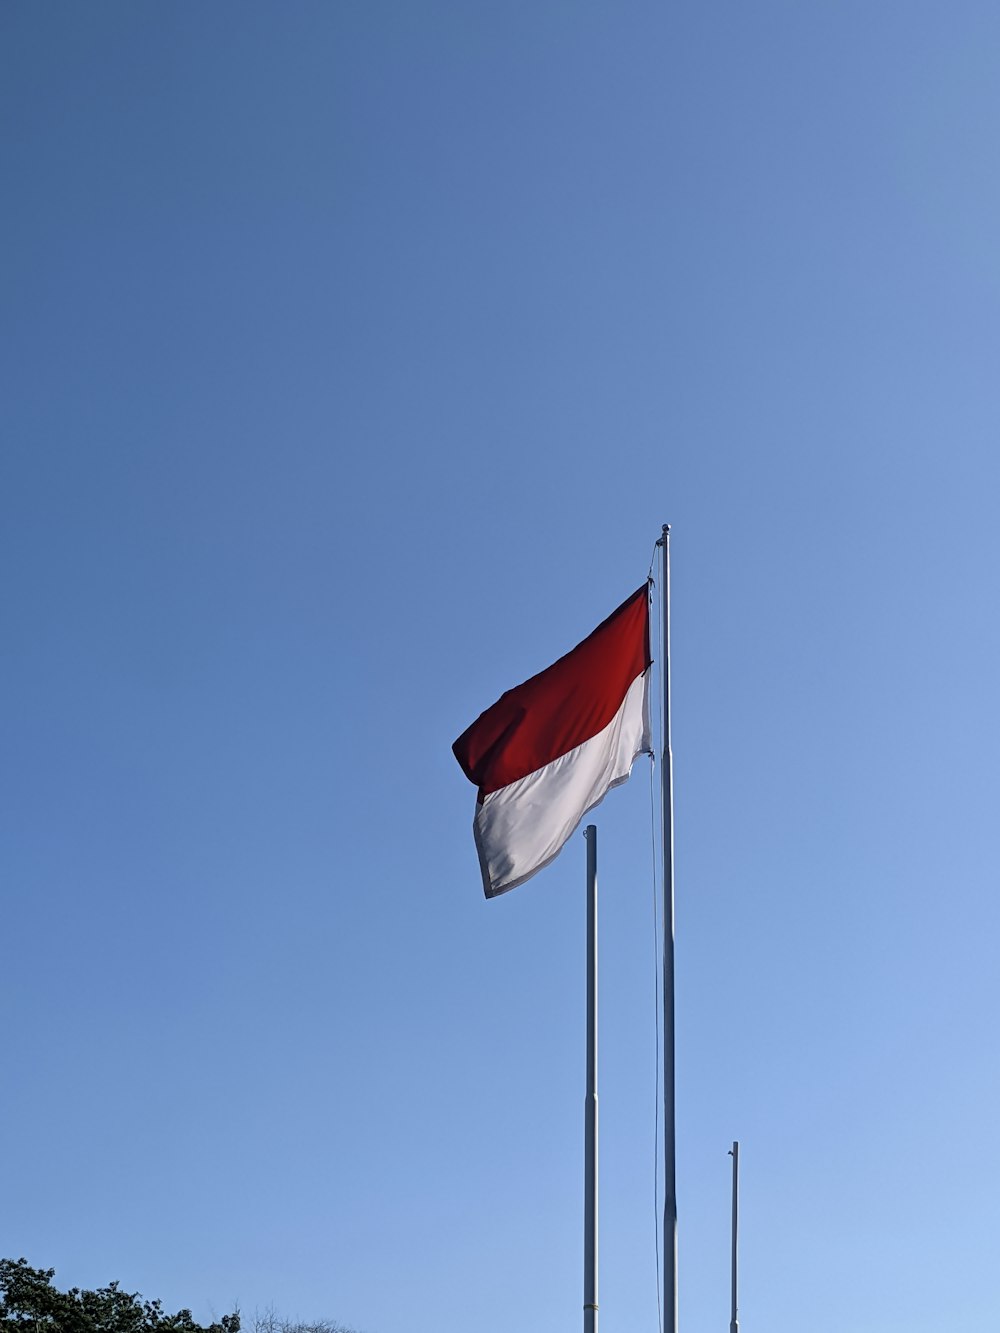 a red and white flag flying in the sky